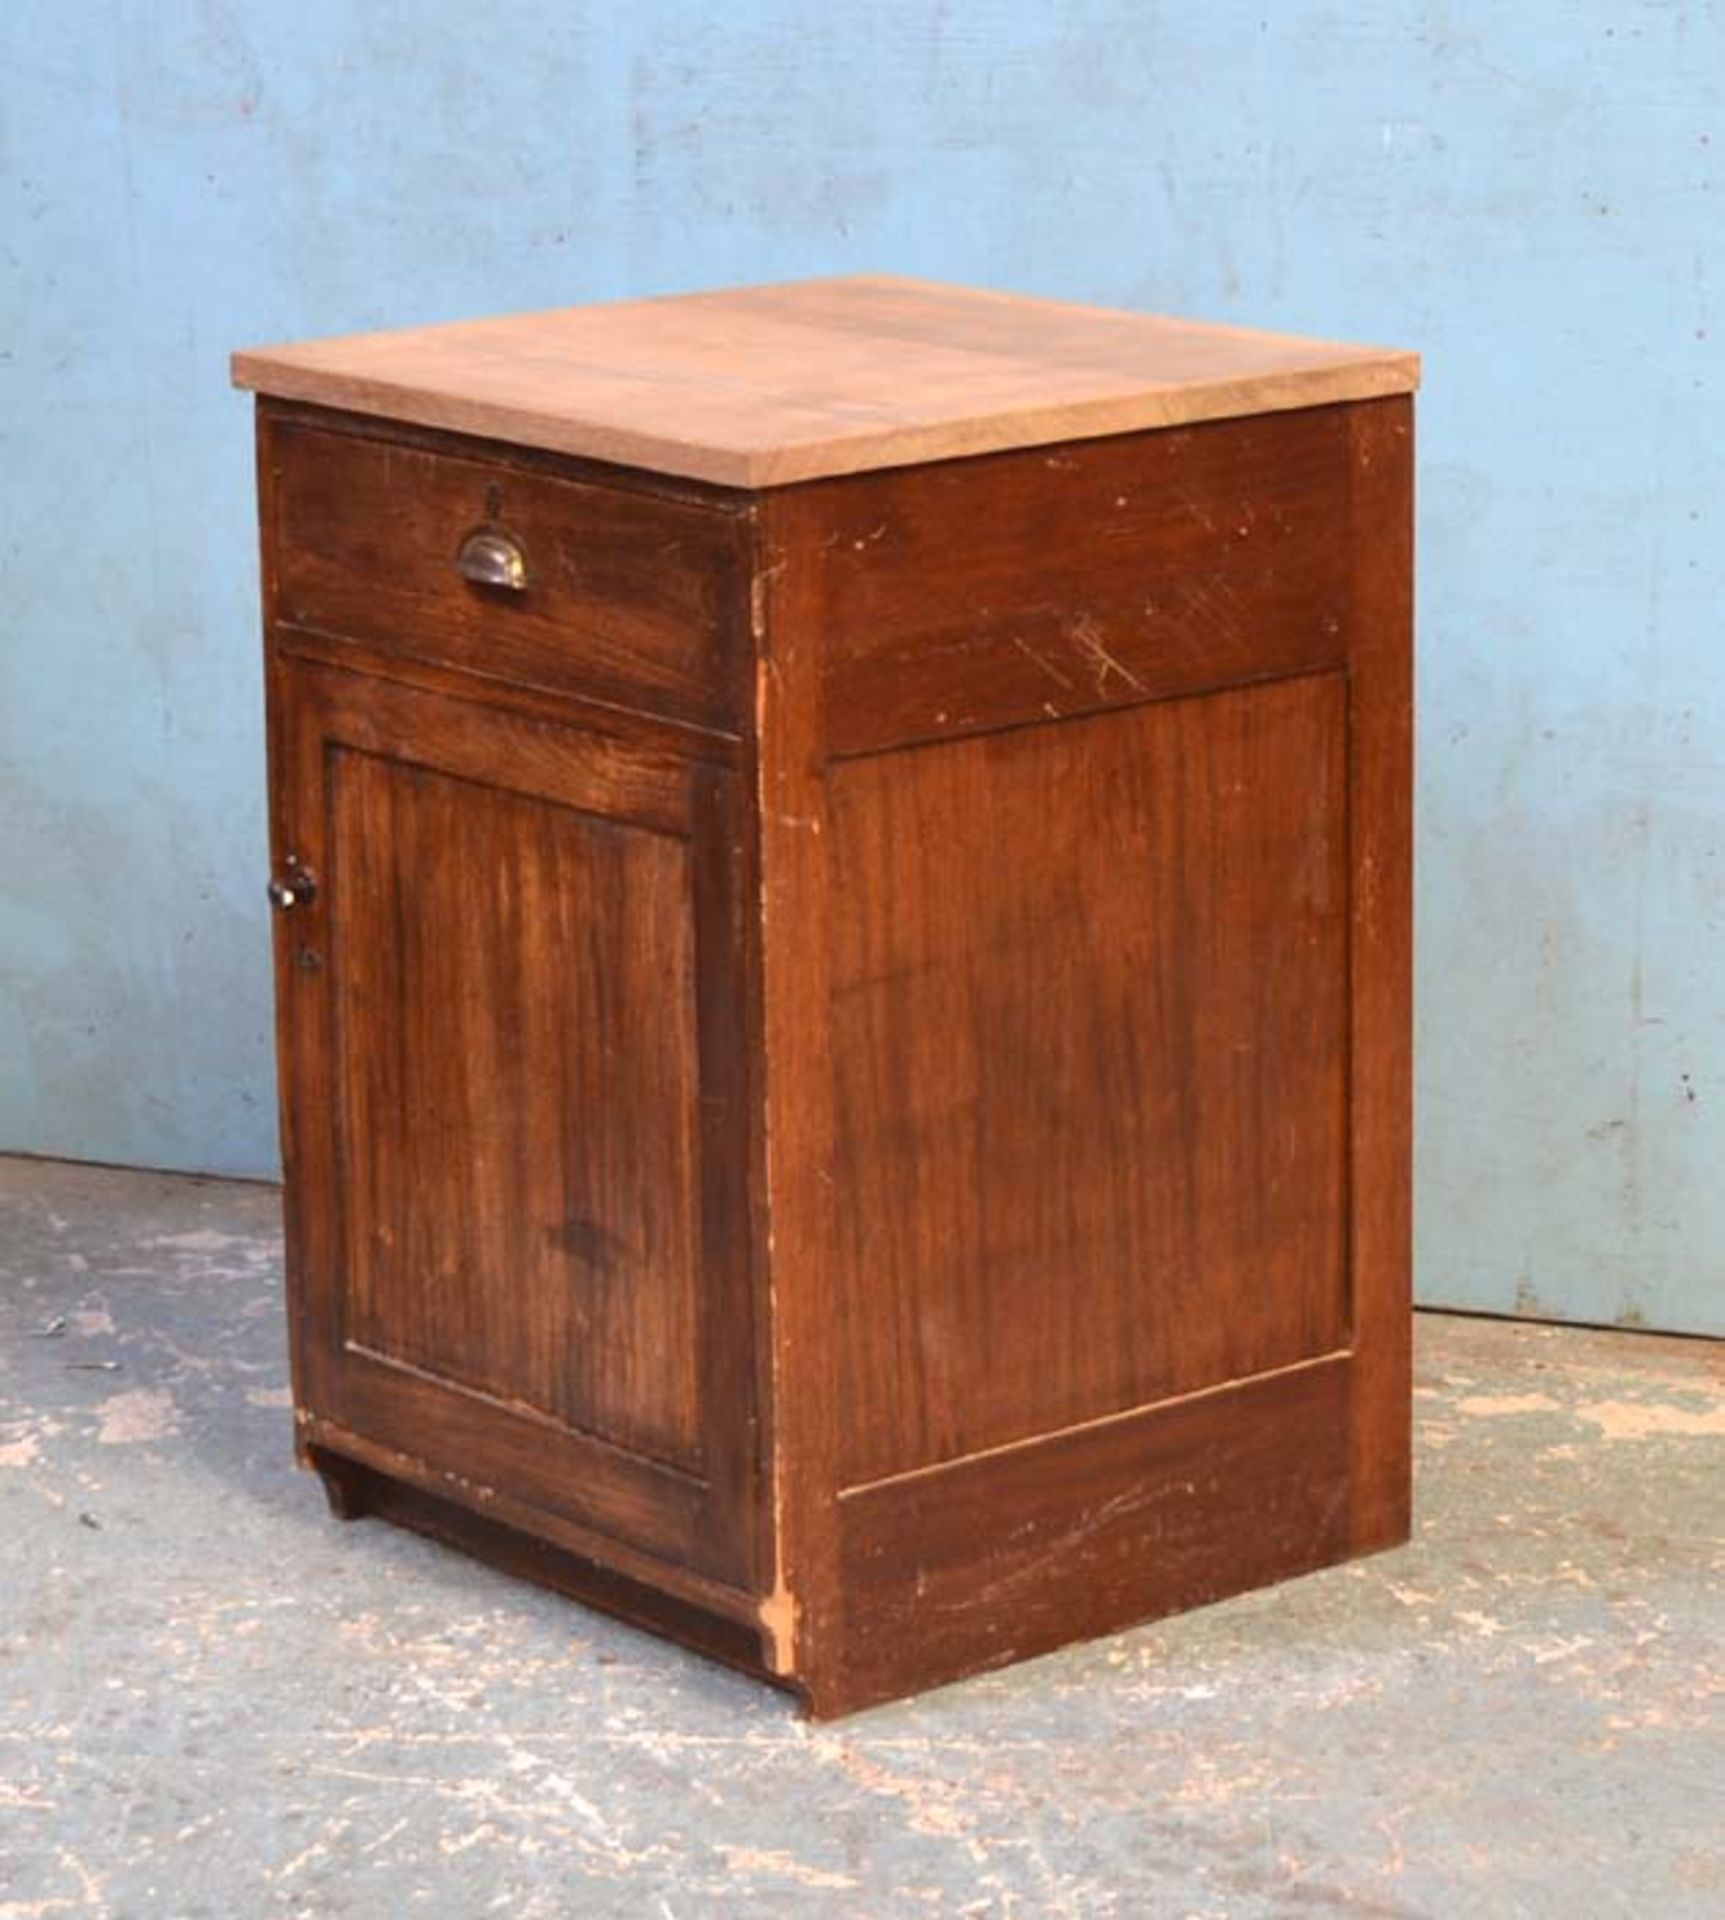 *VINTAGE 1920S LABORATORY CUPBOARD UNIT WITH TEAK TOP. 630MM ( 24.75" ) WIDE X 910MM ( 35.75" ) HIGH - Image 3 of 4